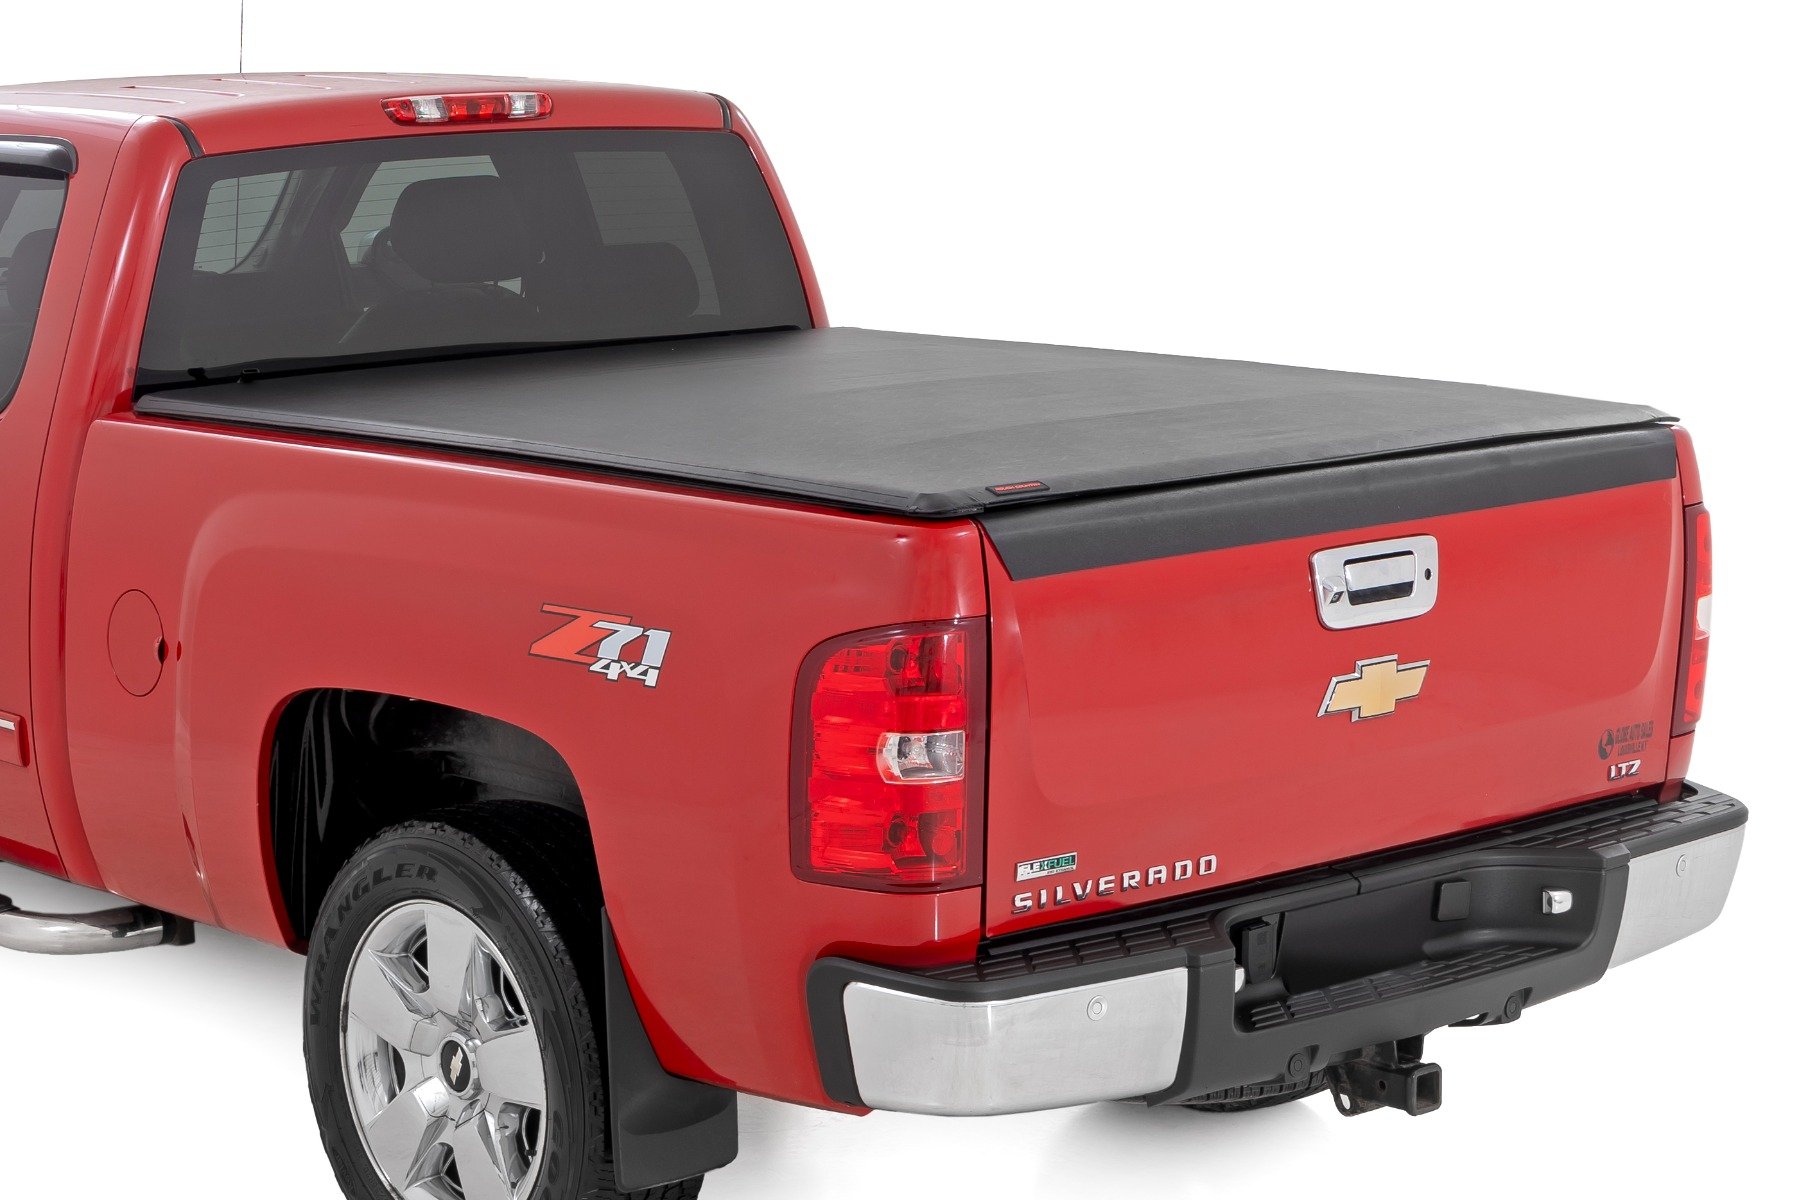 Chevrolet Silverado - Bed Cover - Soft Roll Up - 6'7 Bed